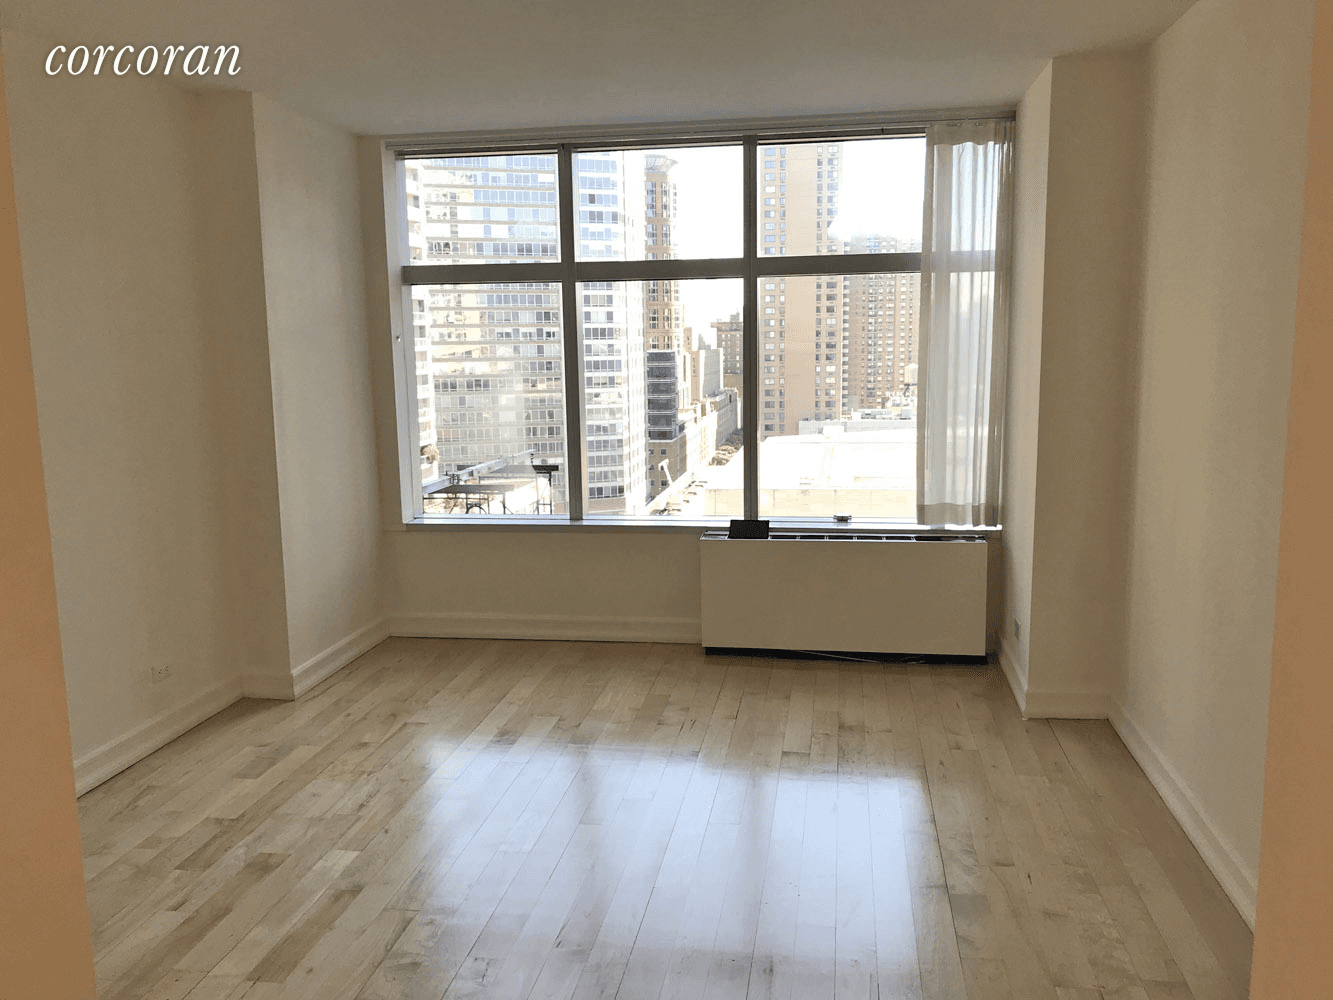 No Fee ! ! ! ! Deluxe One Bedroom at 3 Lincoln Center ; a full service modern condo with amenities !